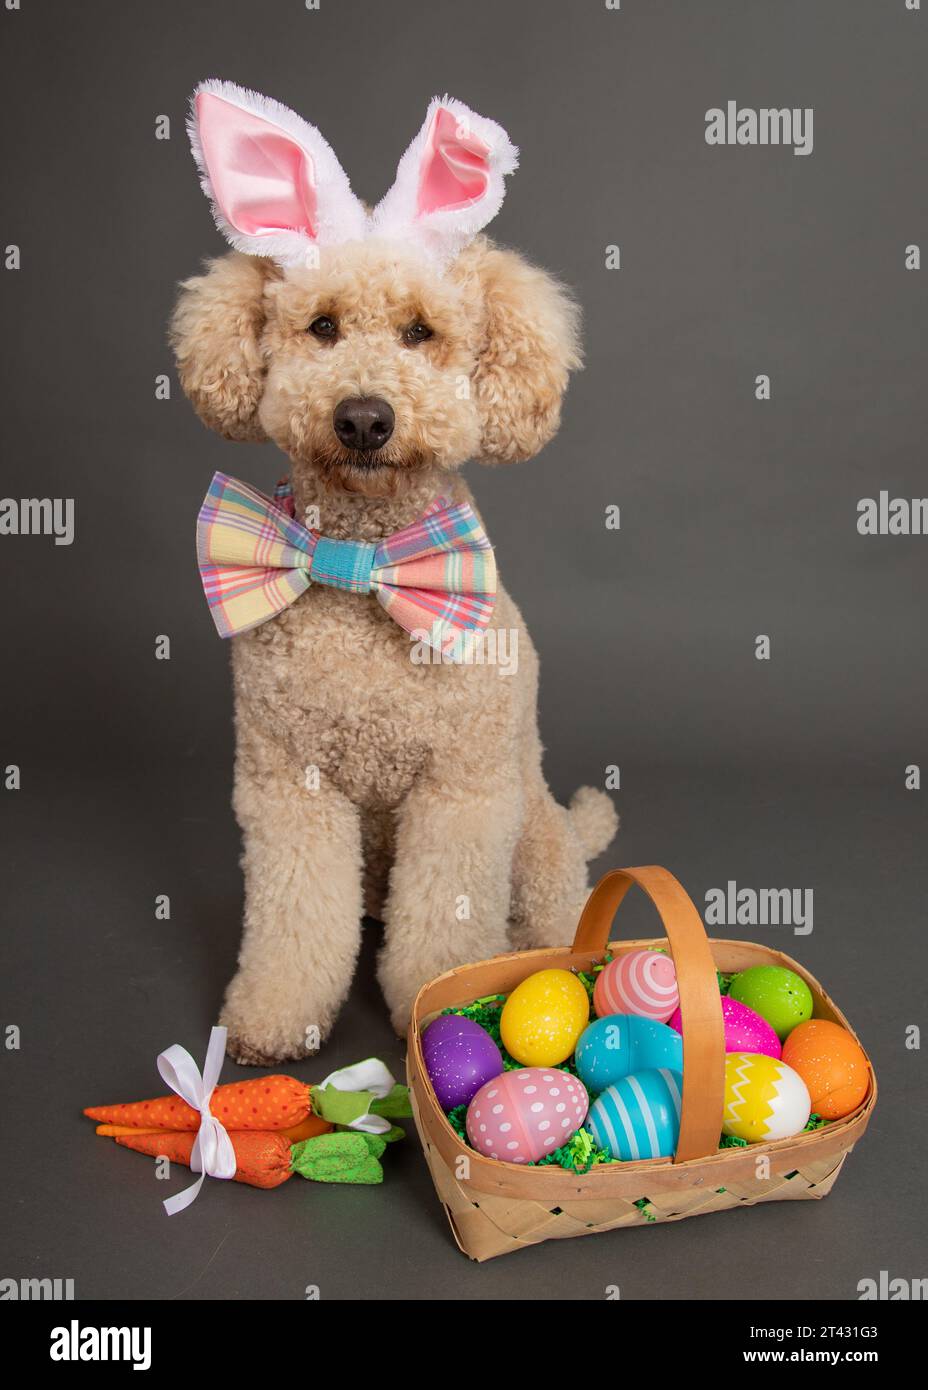 Miniature golden doodle dog dressed as an Easter bunny siting next to a basket filled with painter Easter eggs Stock Photo